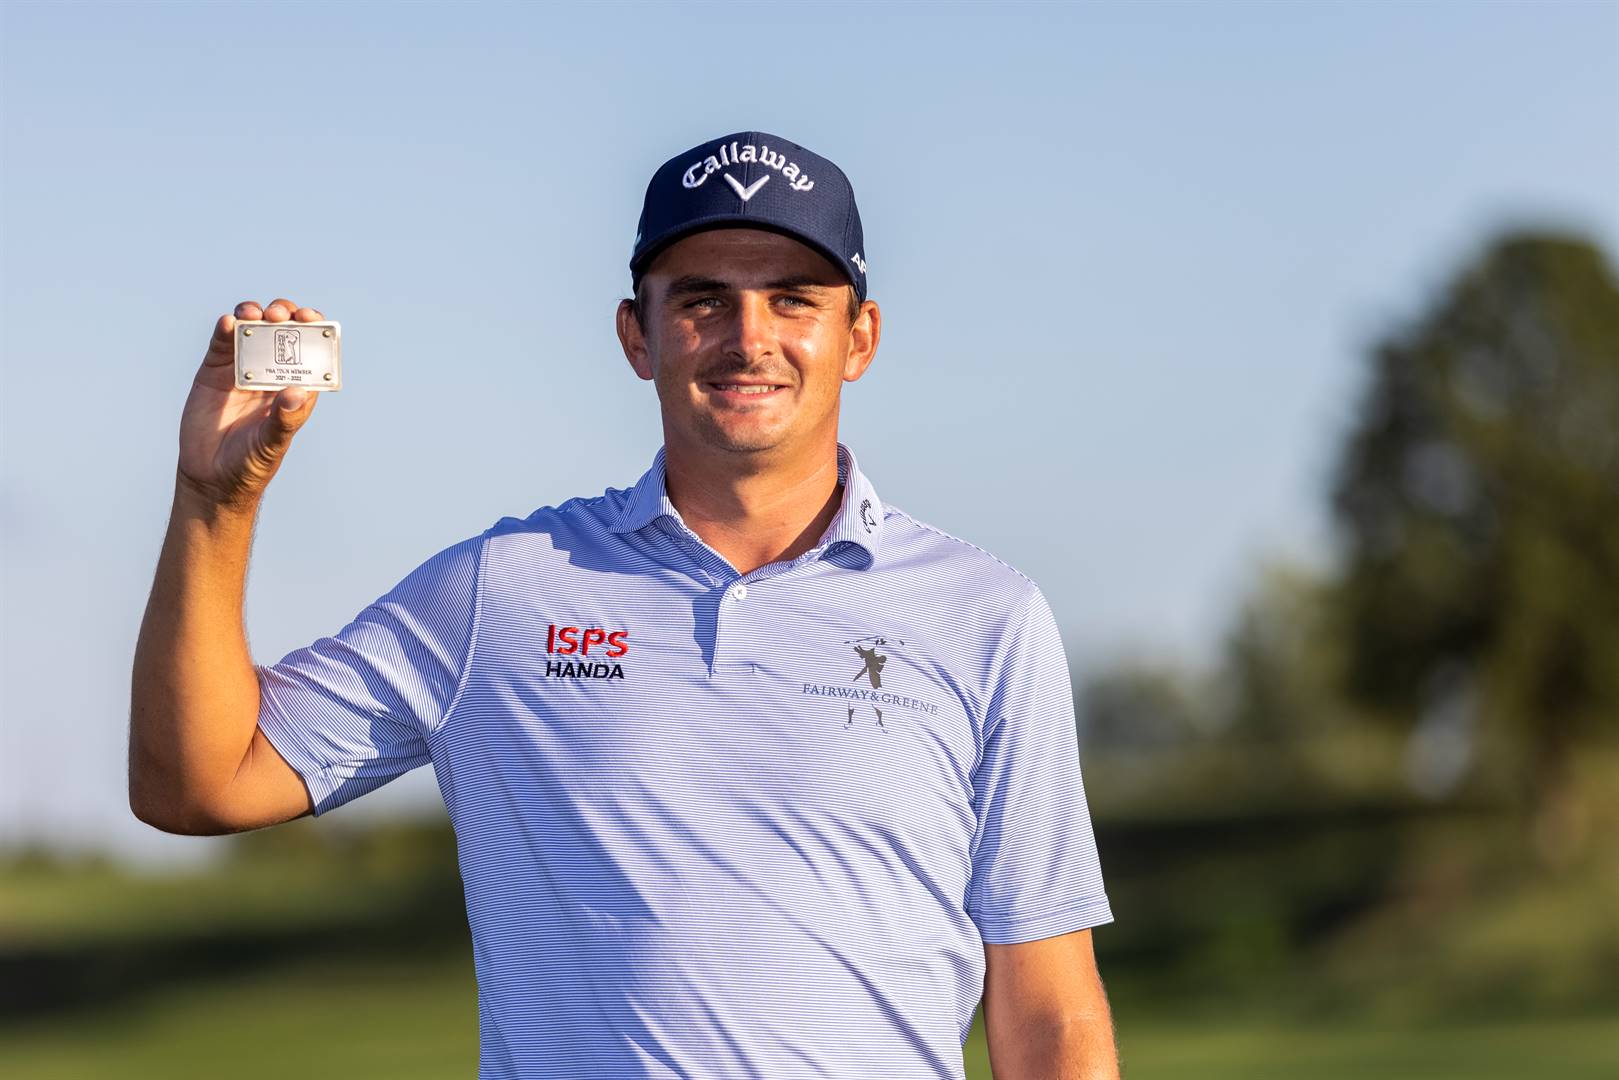 Christiaan Bezuidenhout defends his SA Open title at Sun City this week. Getty Images